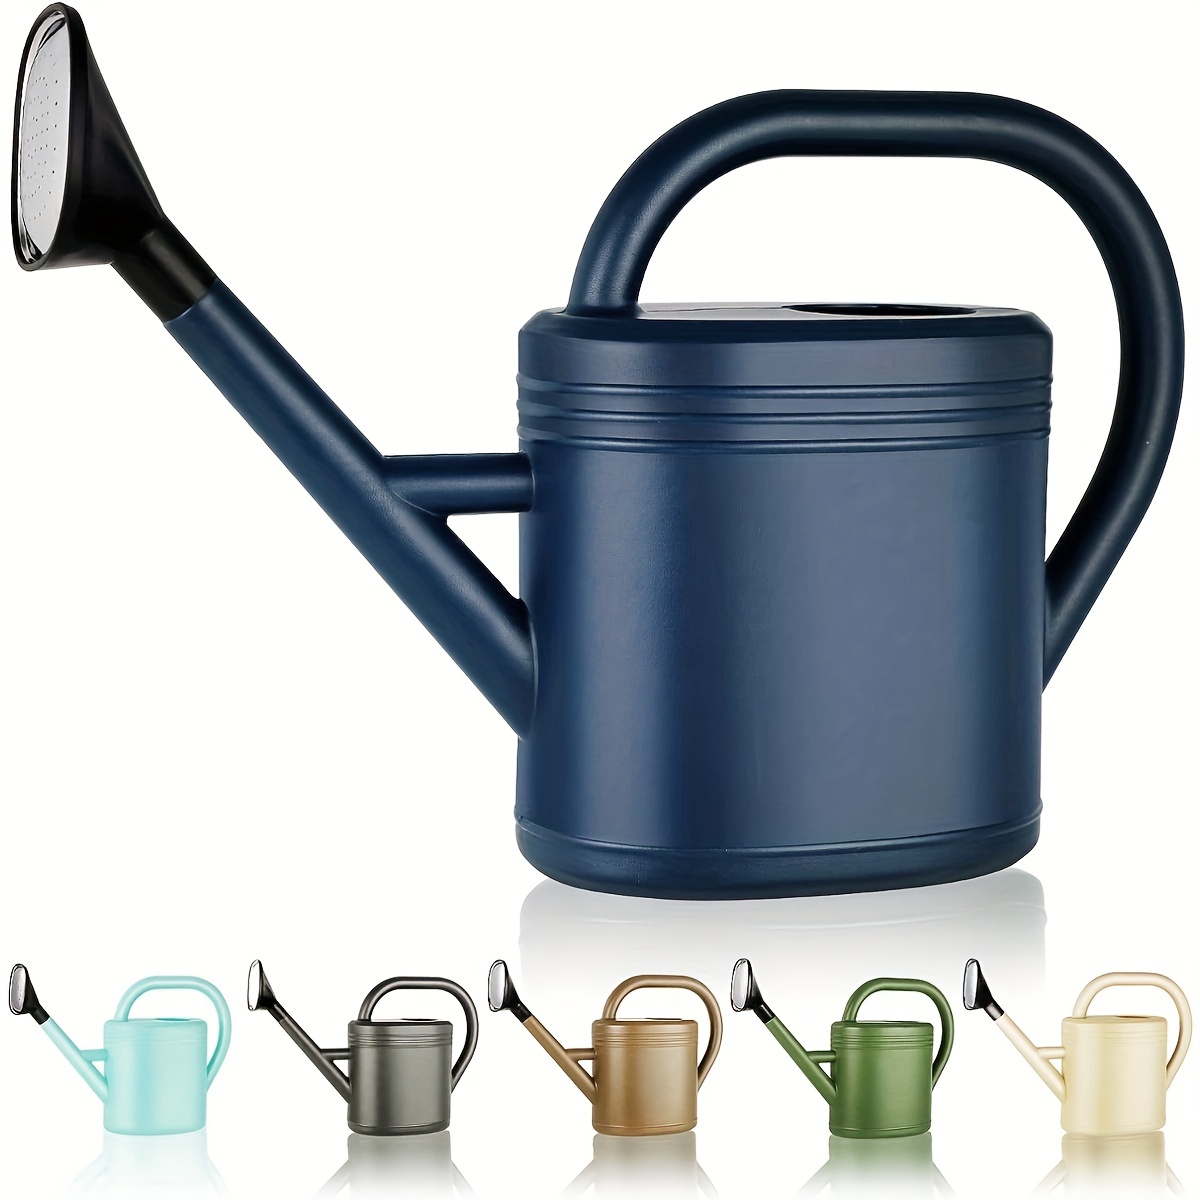 1pc watering can for indoor plants garden watering cans for outdoor plant house flower modern large long spout with sprinkler head 1 gallon